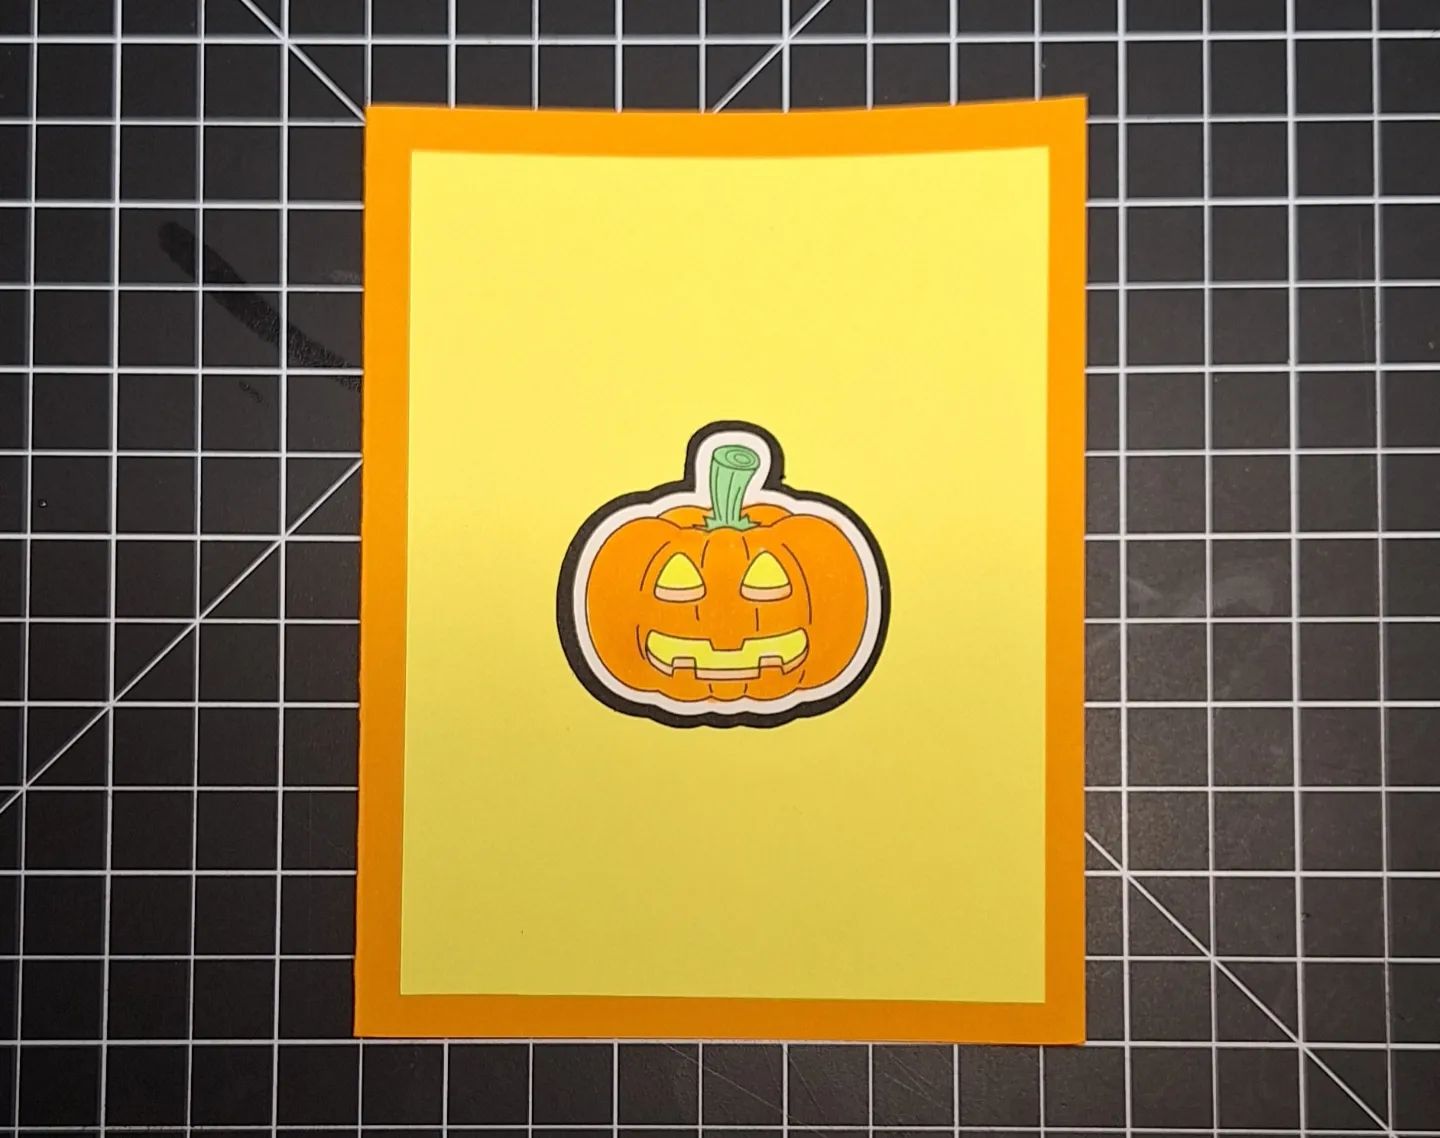 Great Pumpkin card. I was going to make a different card but I set that aside for now and made this for halloween #card #cardmaking #papercraft #papercrafts #pumpkin #orange #greatpumpkin